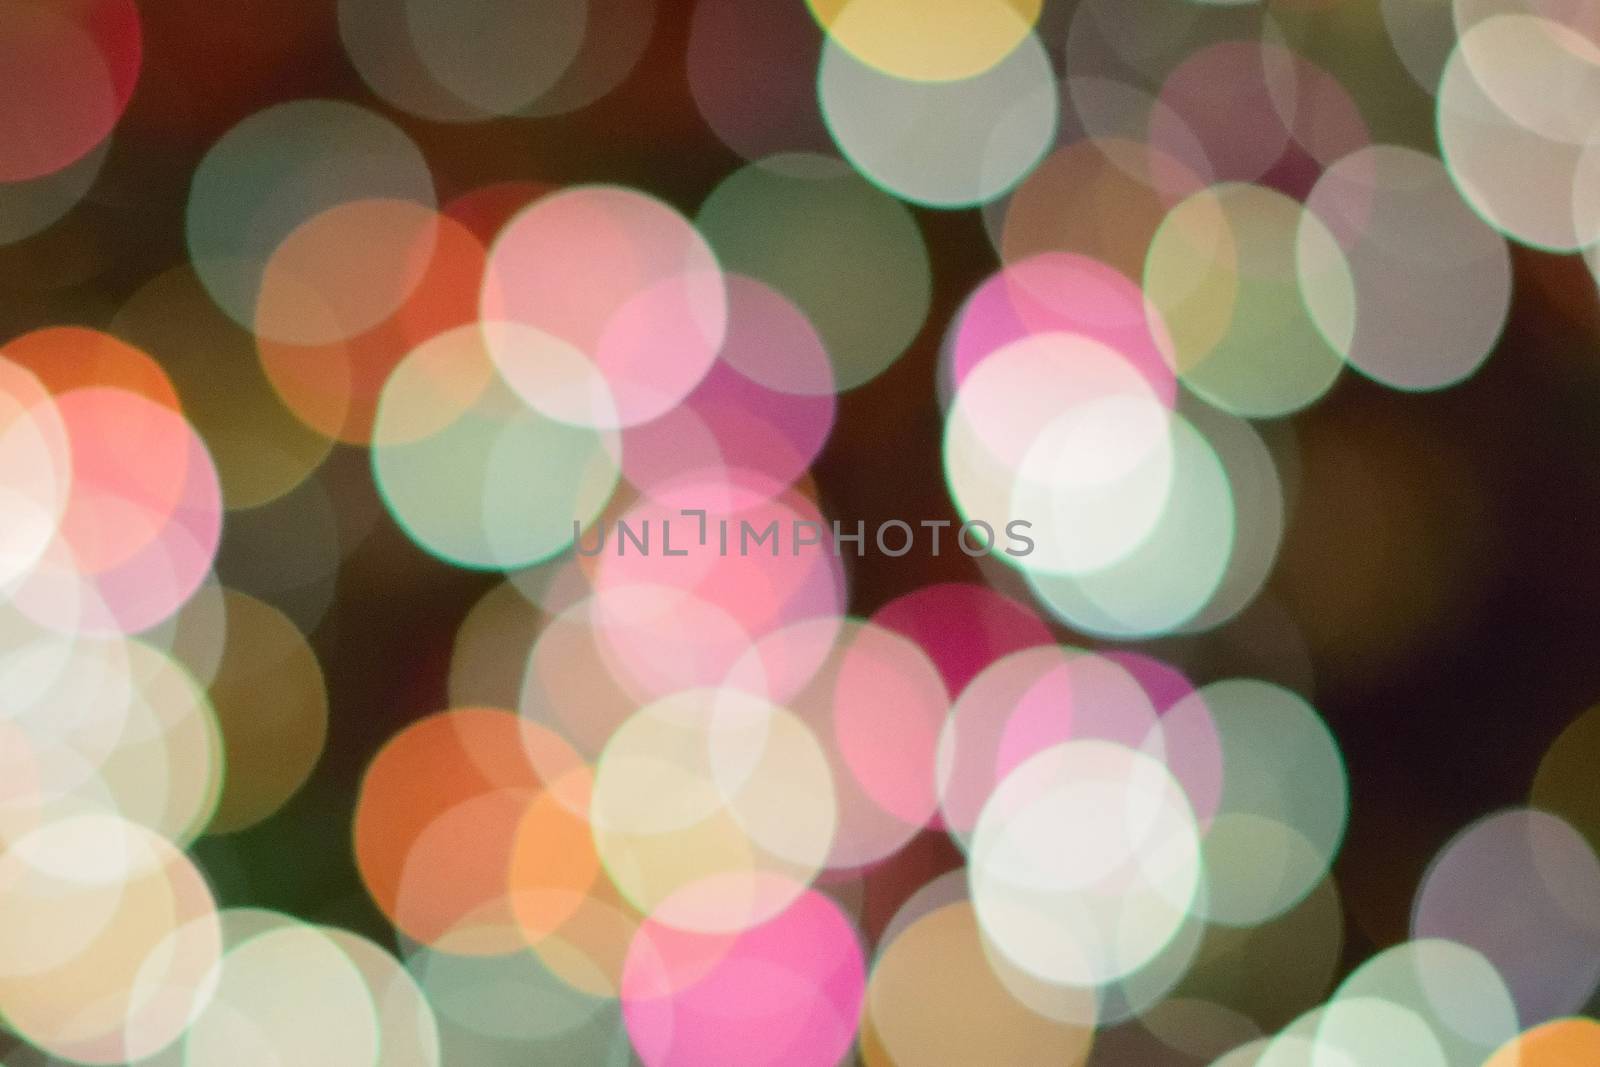 Abstract texture of colorful Christmas lights background blurs in horizontal frame